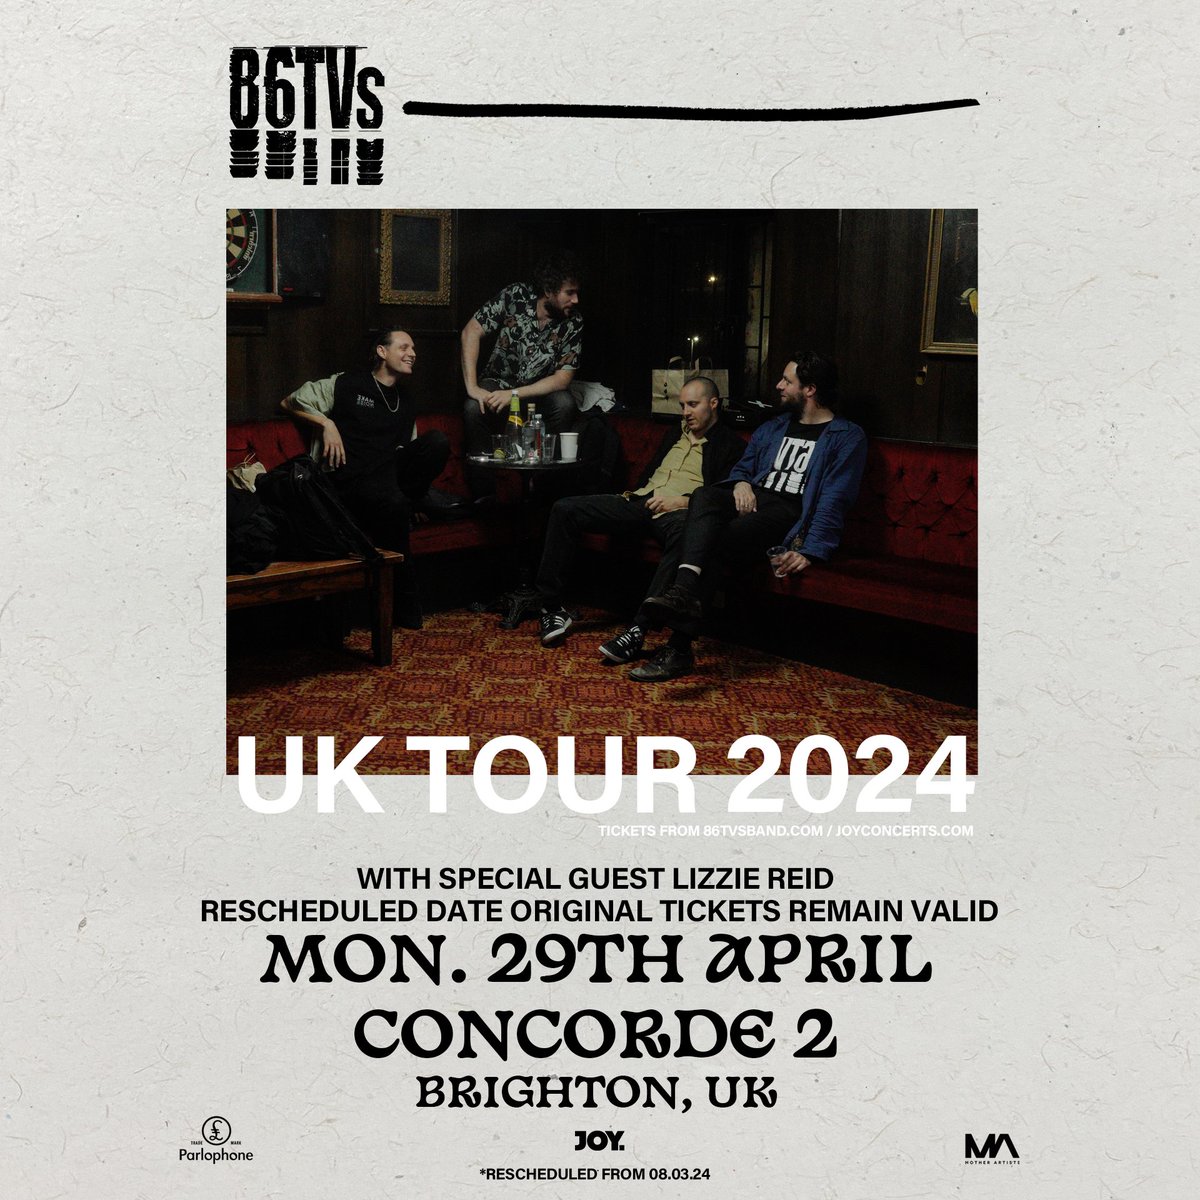 Pleased to announce that @lizziereidmusic will still be joining @86TVsband on their rescheduled date at @concorde_2 🌟 📆 Mon 29th April 🎟 bit.ly/3FAlPjY